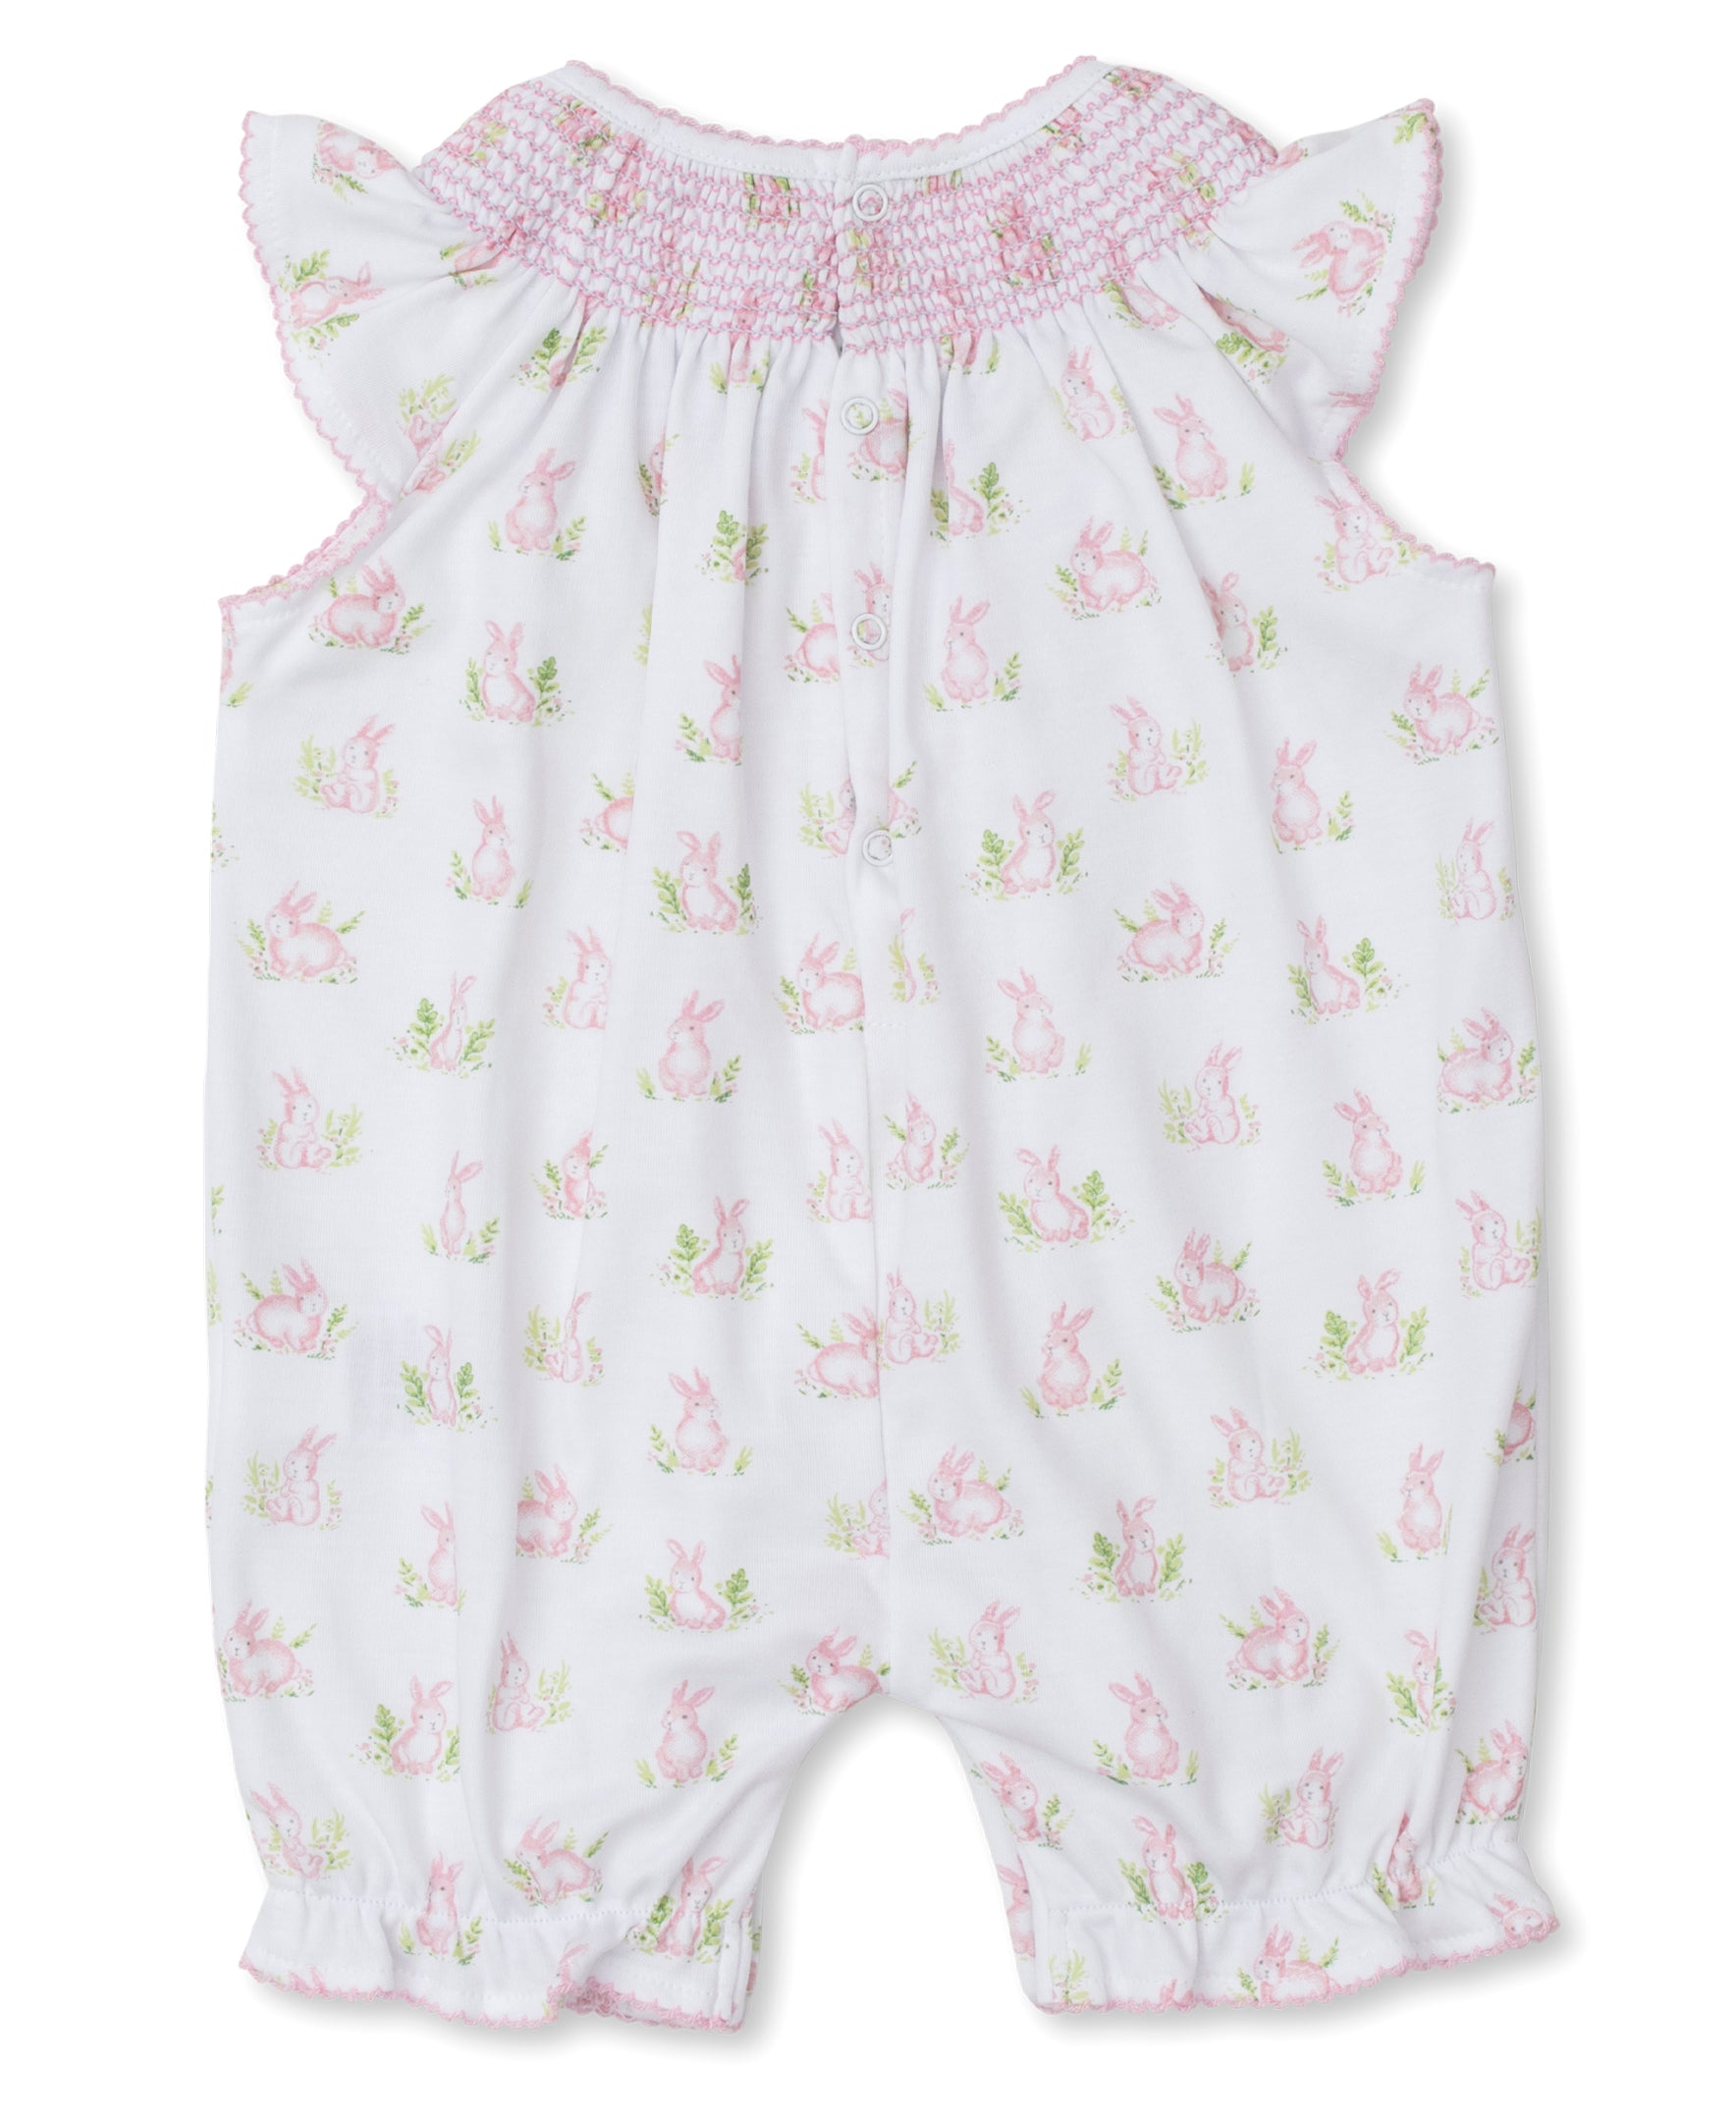 Cottontail Hollows Pink Print Short Playsuit - Kissy Kissy